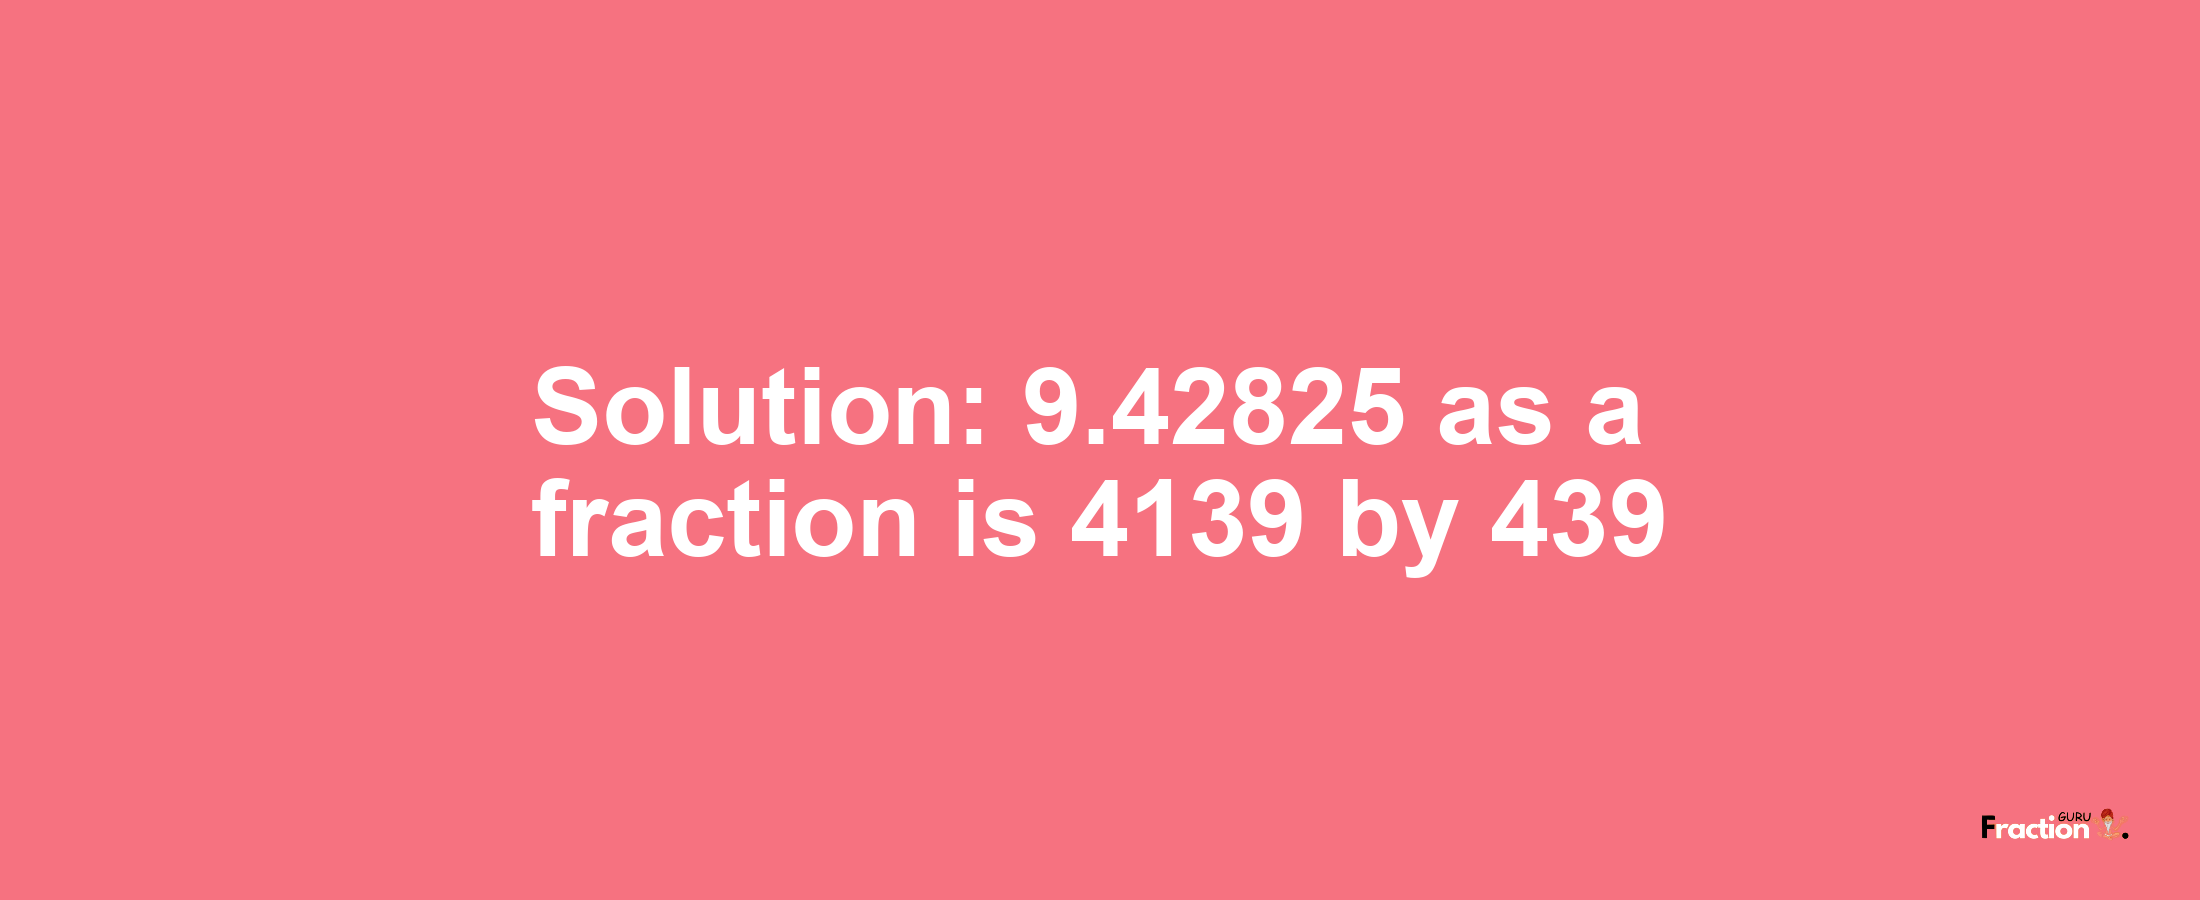 Solution:9.42825 as a fraction is 4139/439